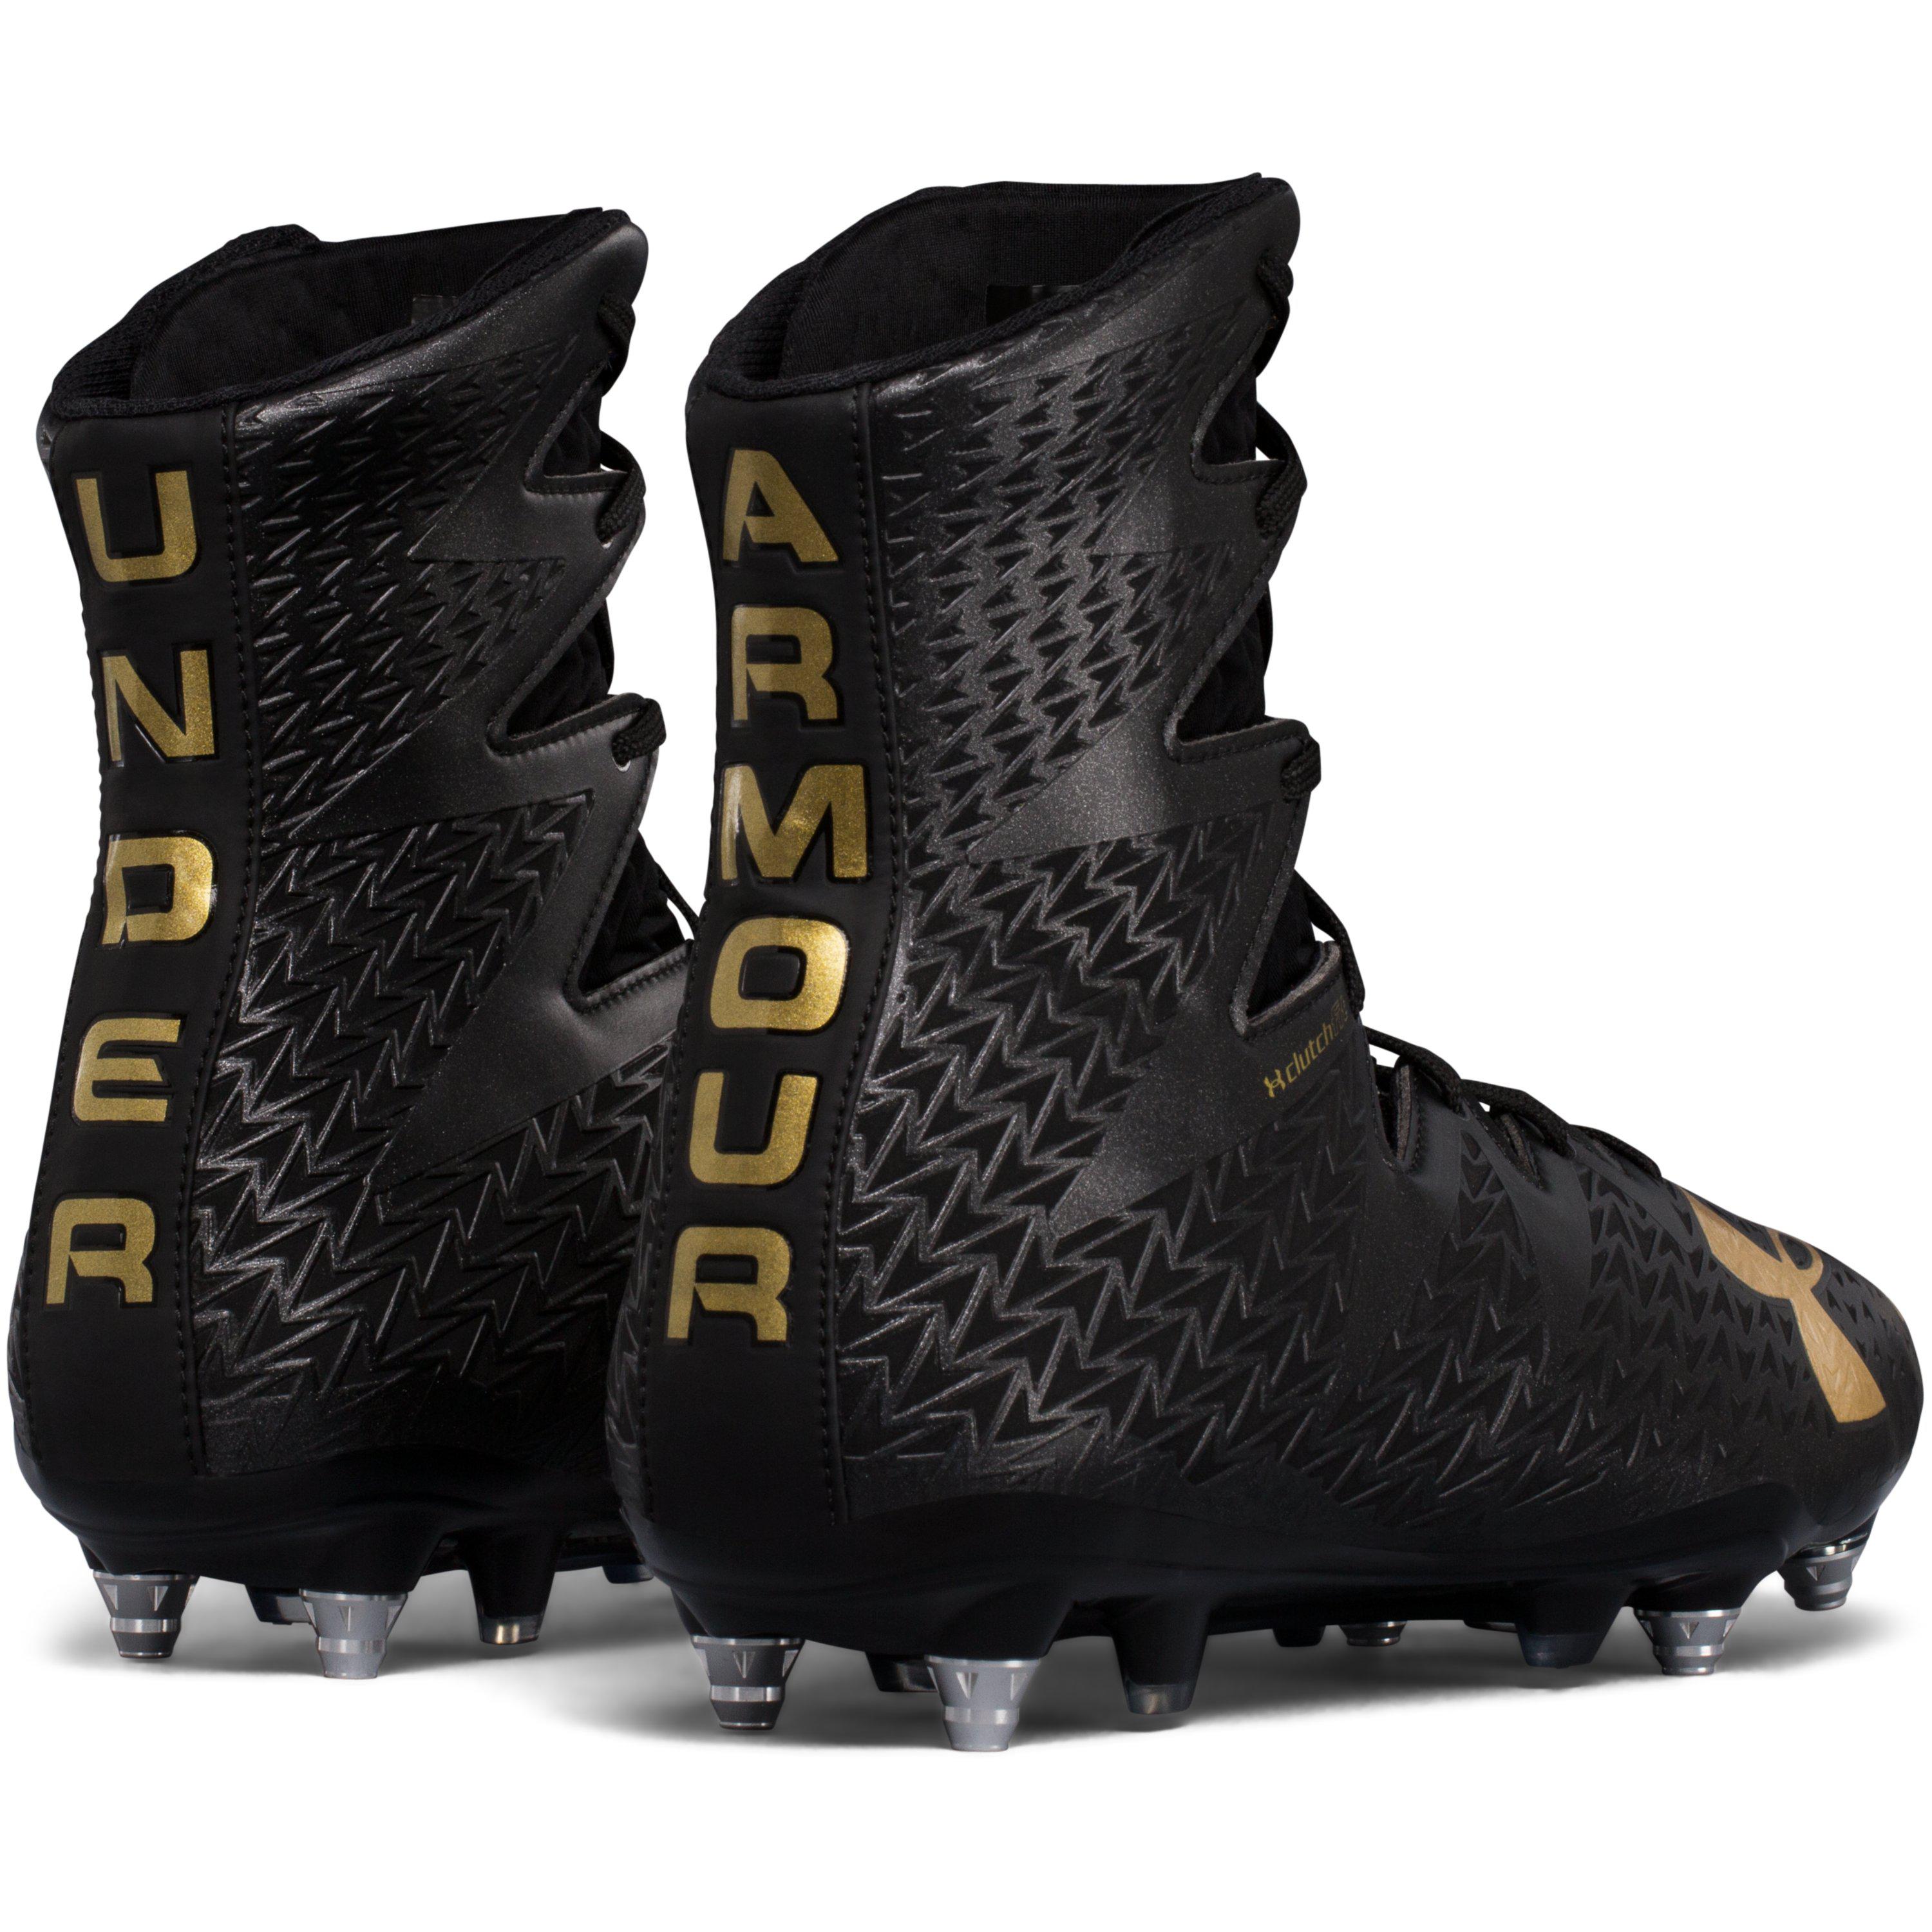 Under Armour Men's Ua Highlight Hybrid Rugby Cleats in Black for Men - Lyst